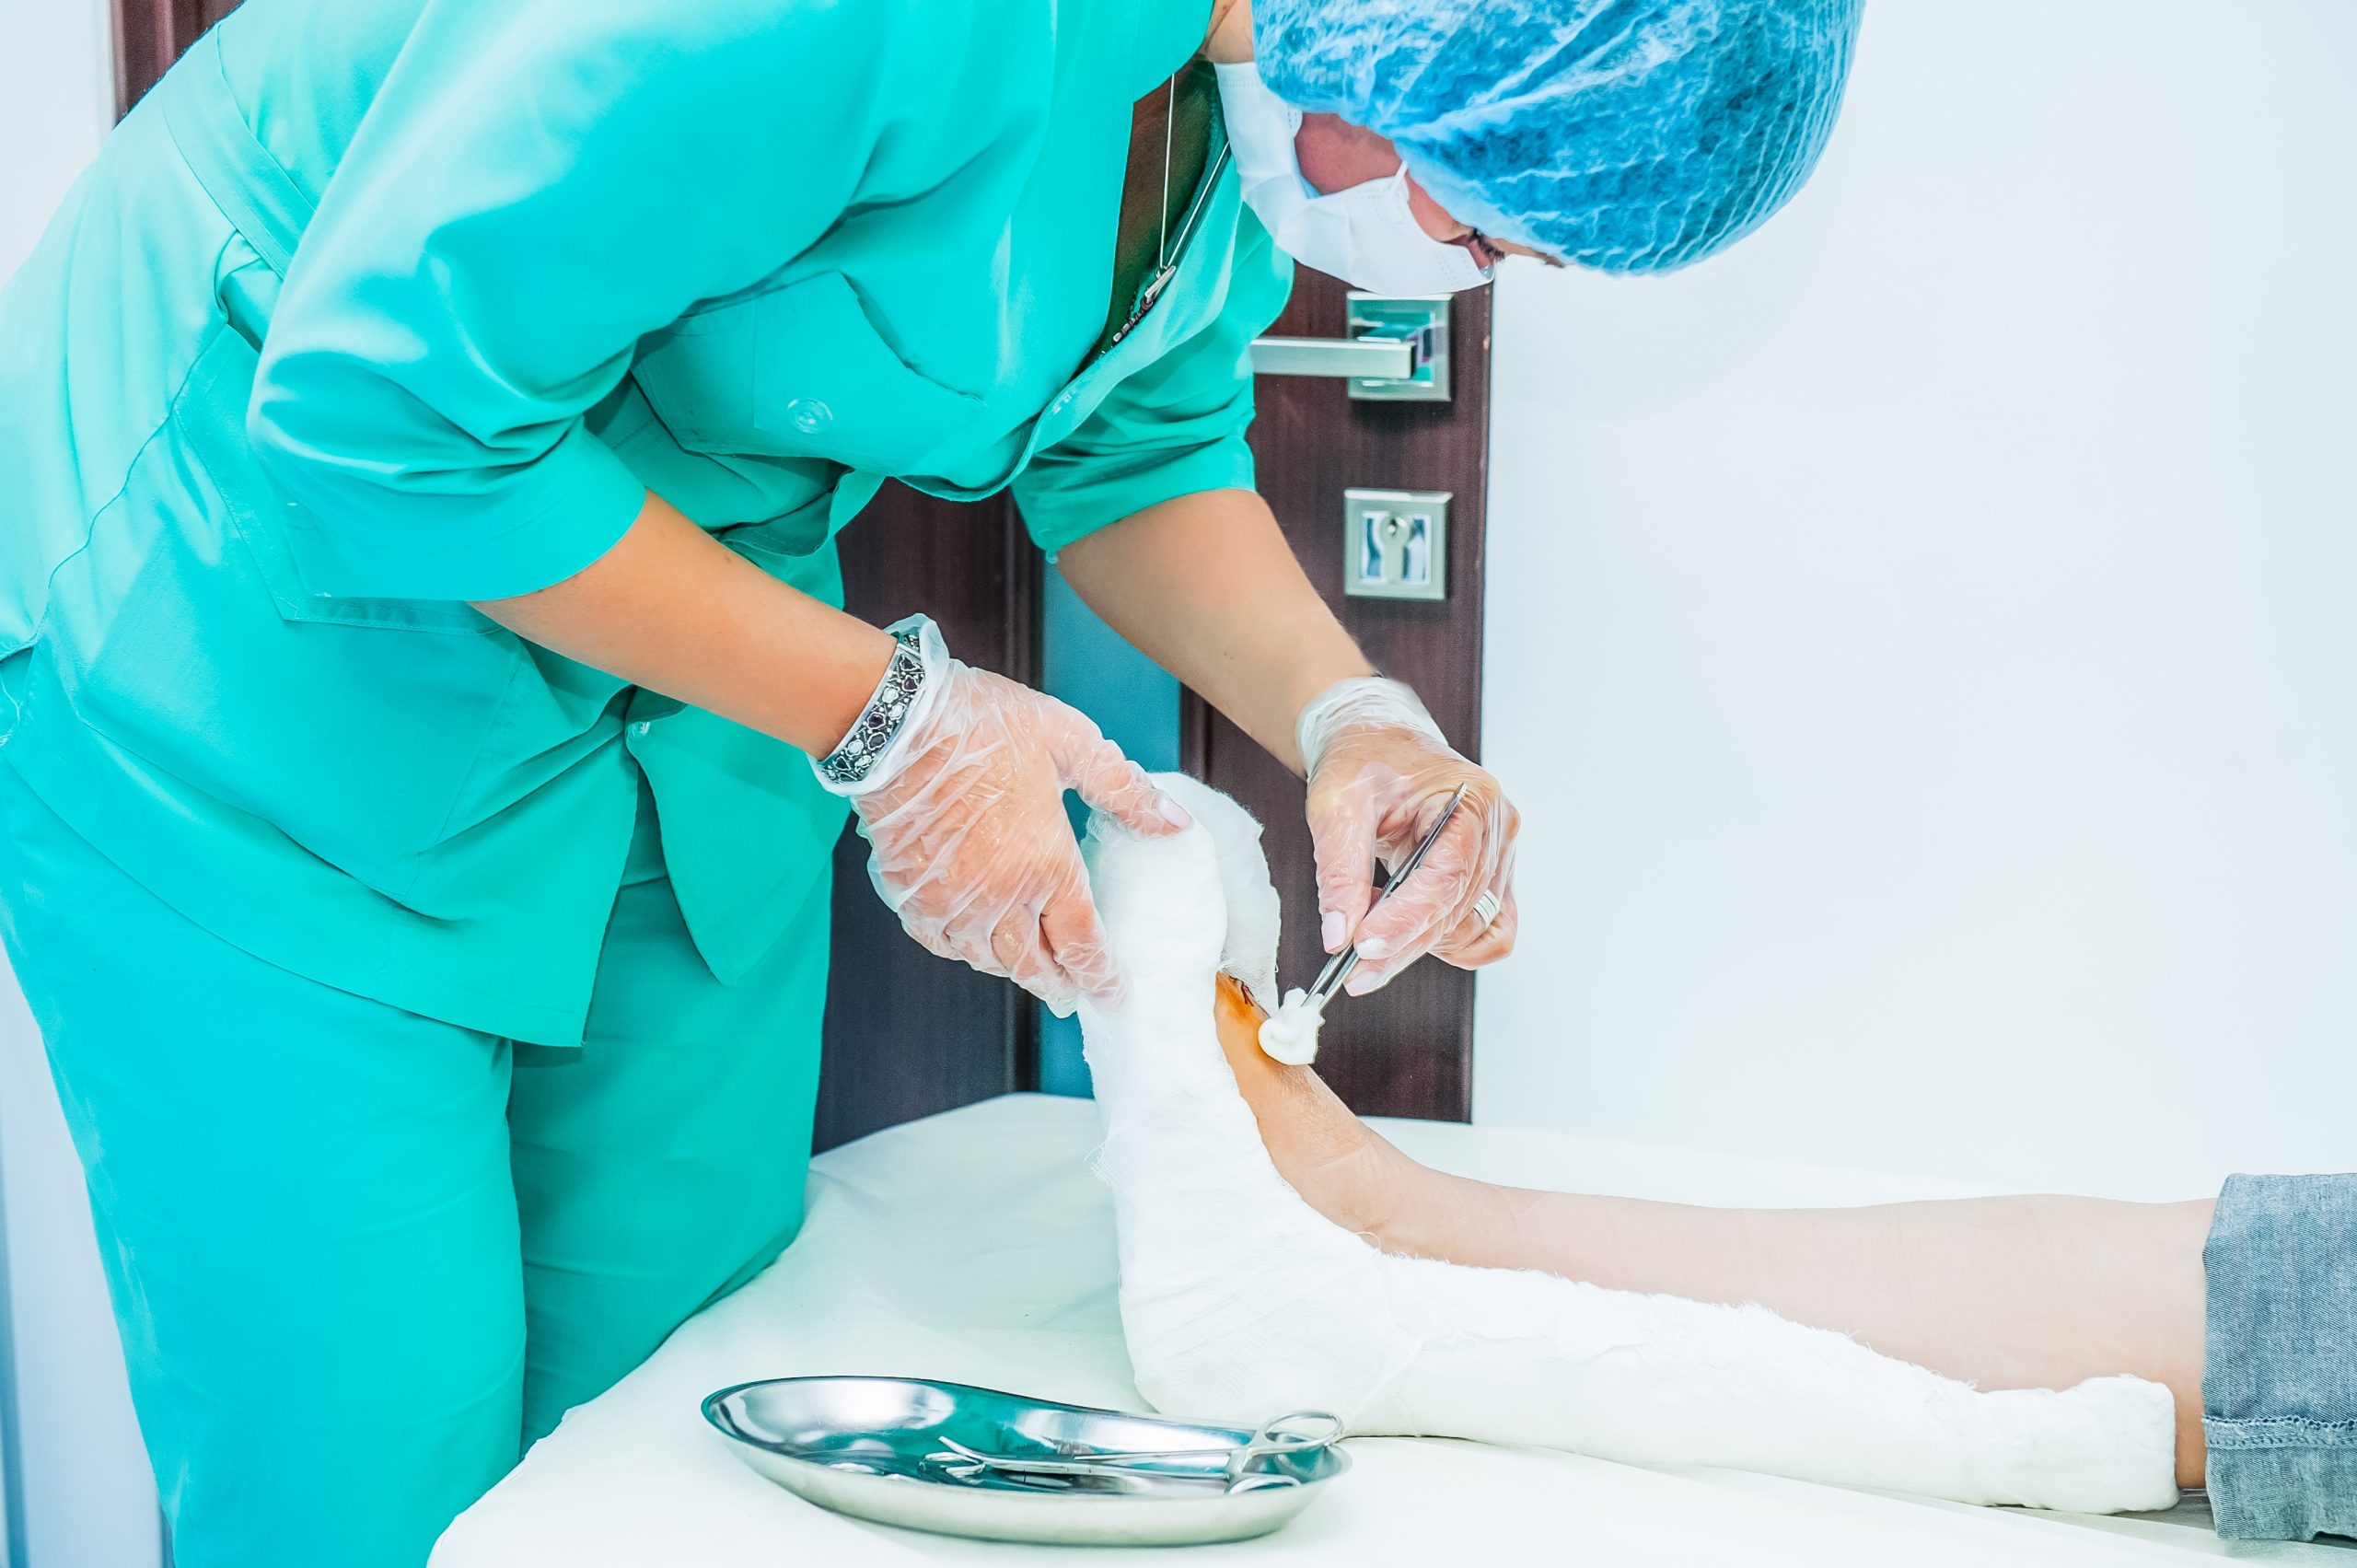 A podiatrist (feet doctor) wearing a green scrub and treating a foot ulcer on the patient's leg in a clinic room